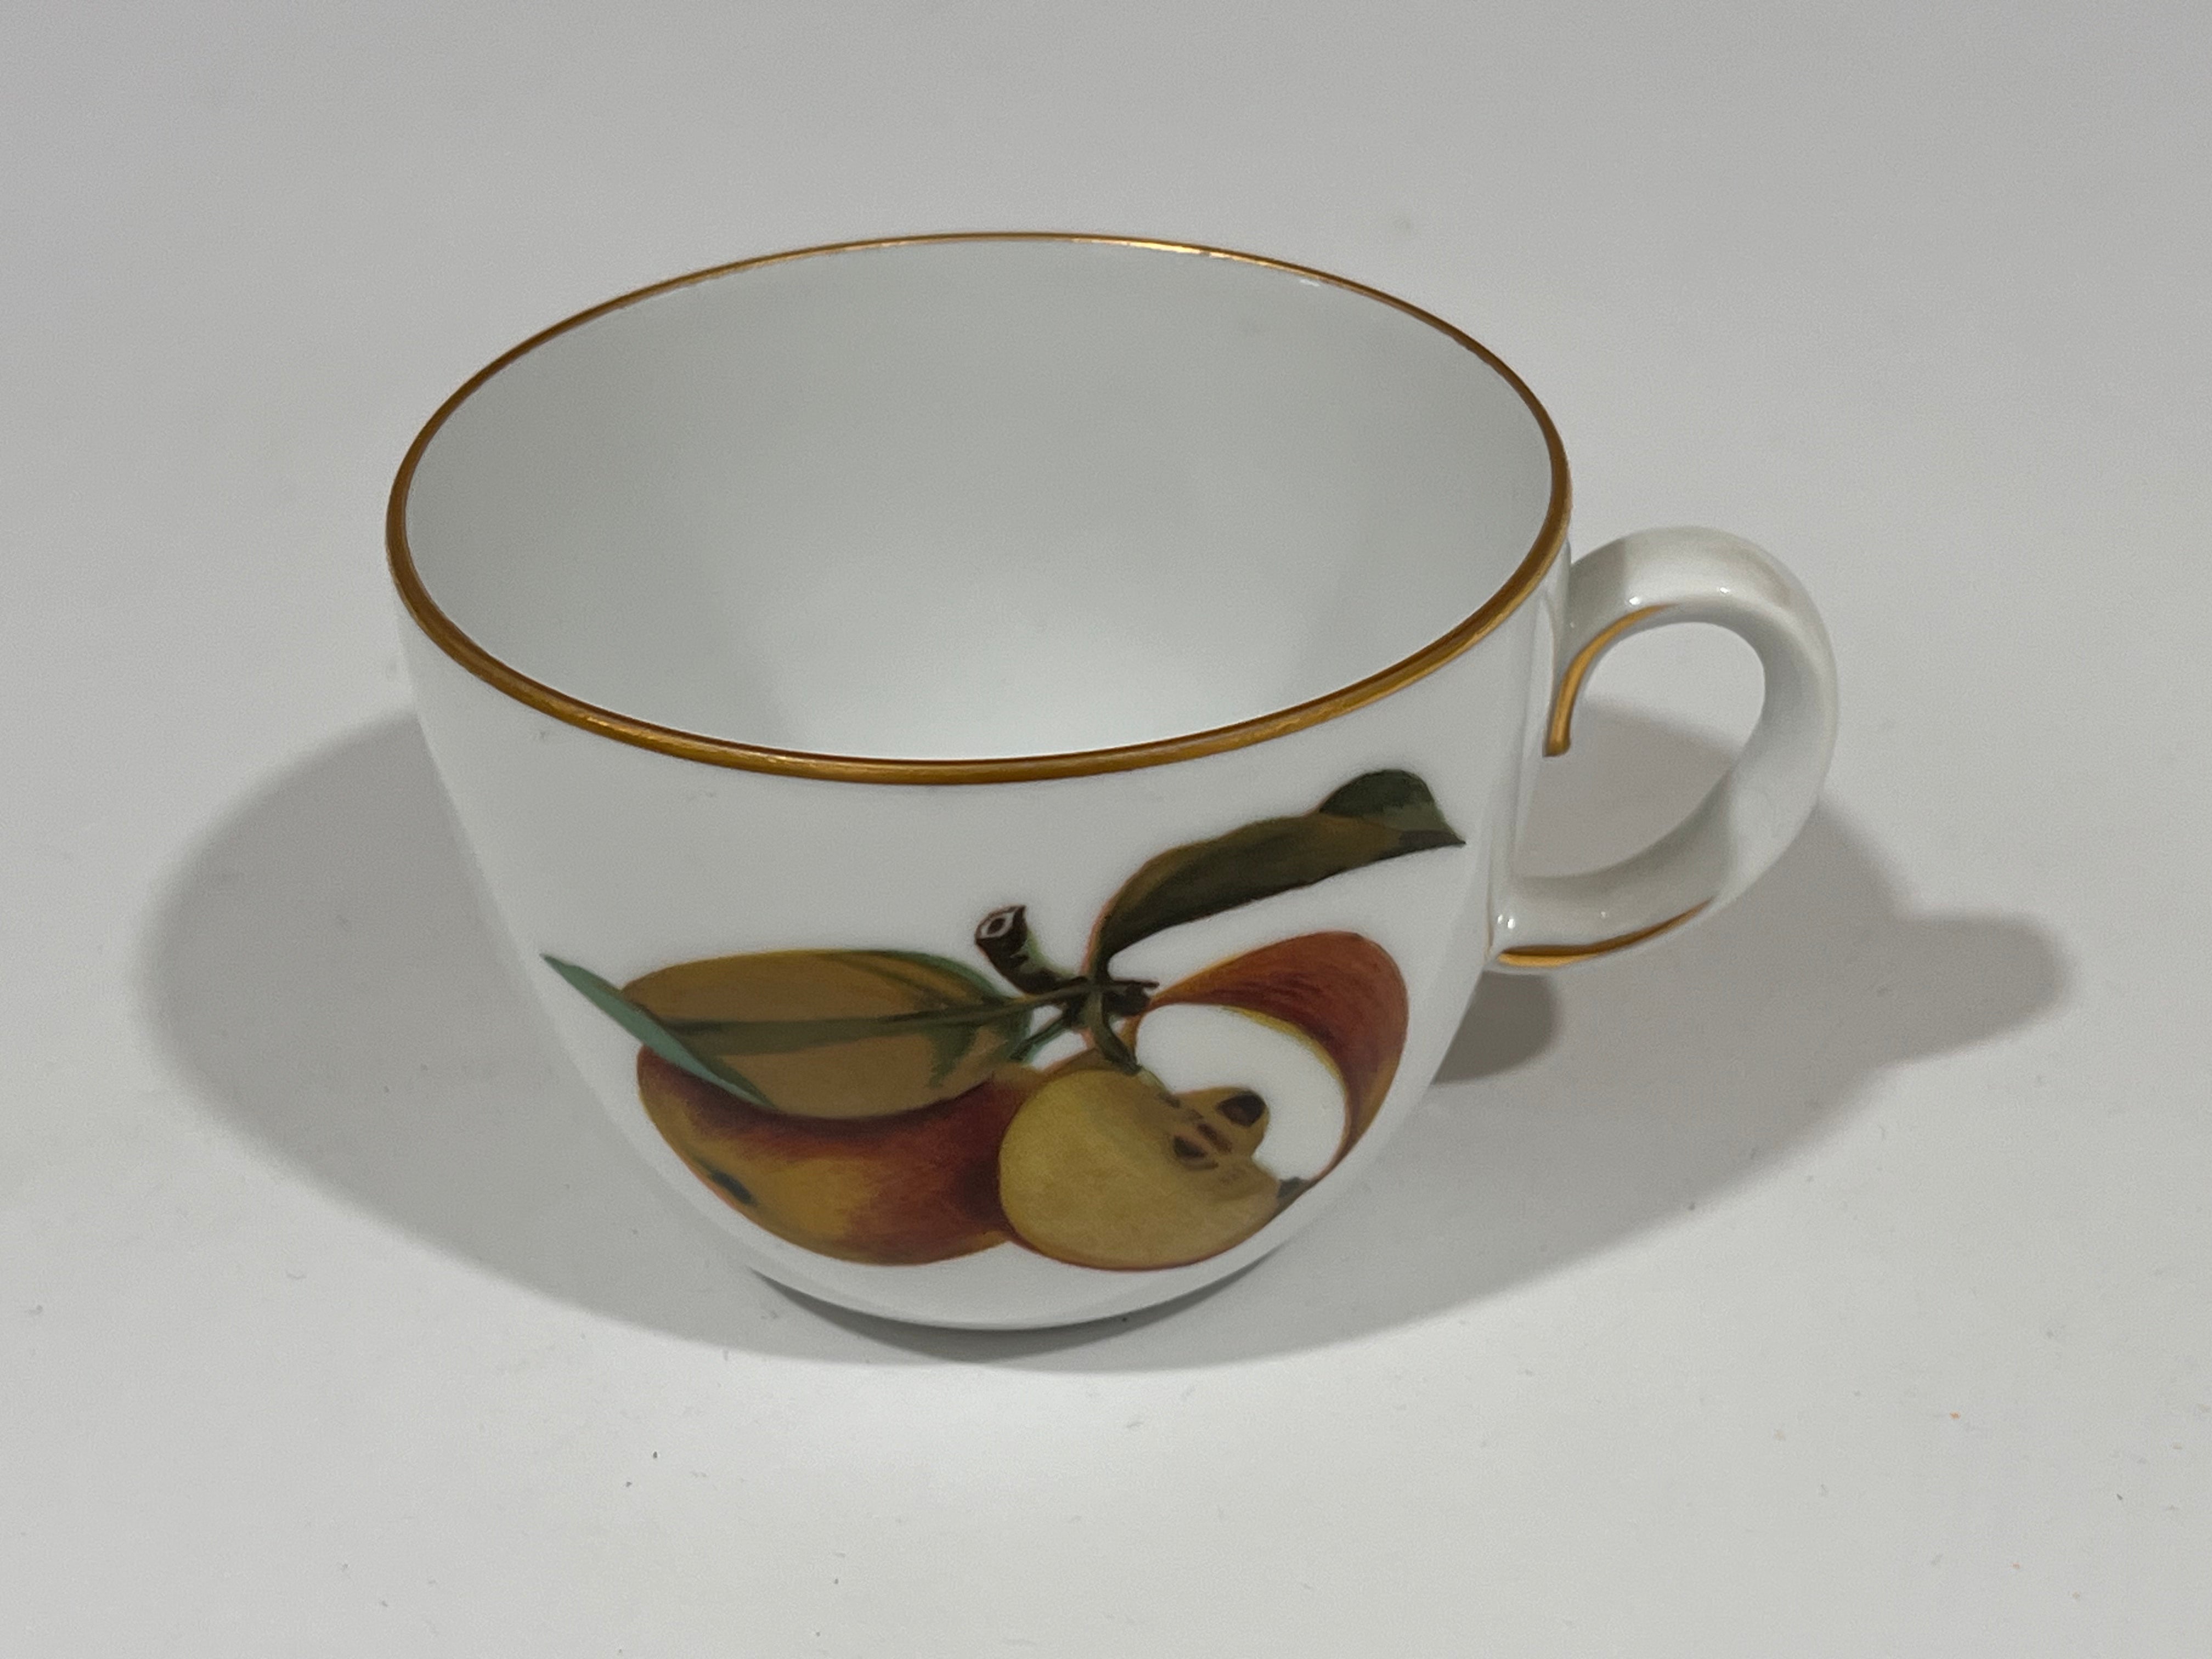 Royal Worchester Evesham Original Porcelain Fine China - Cup and Saucer - Gold Trim - From England